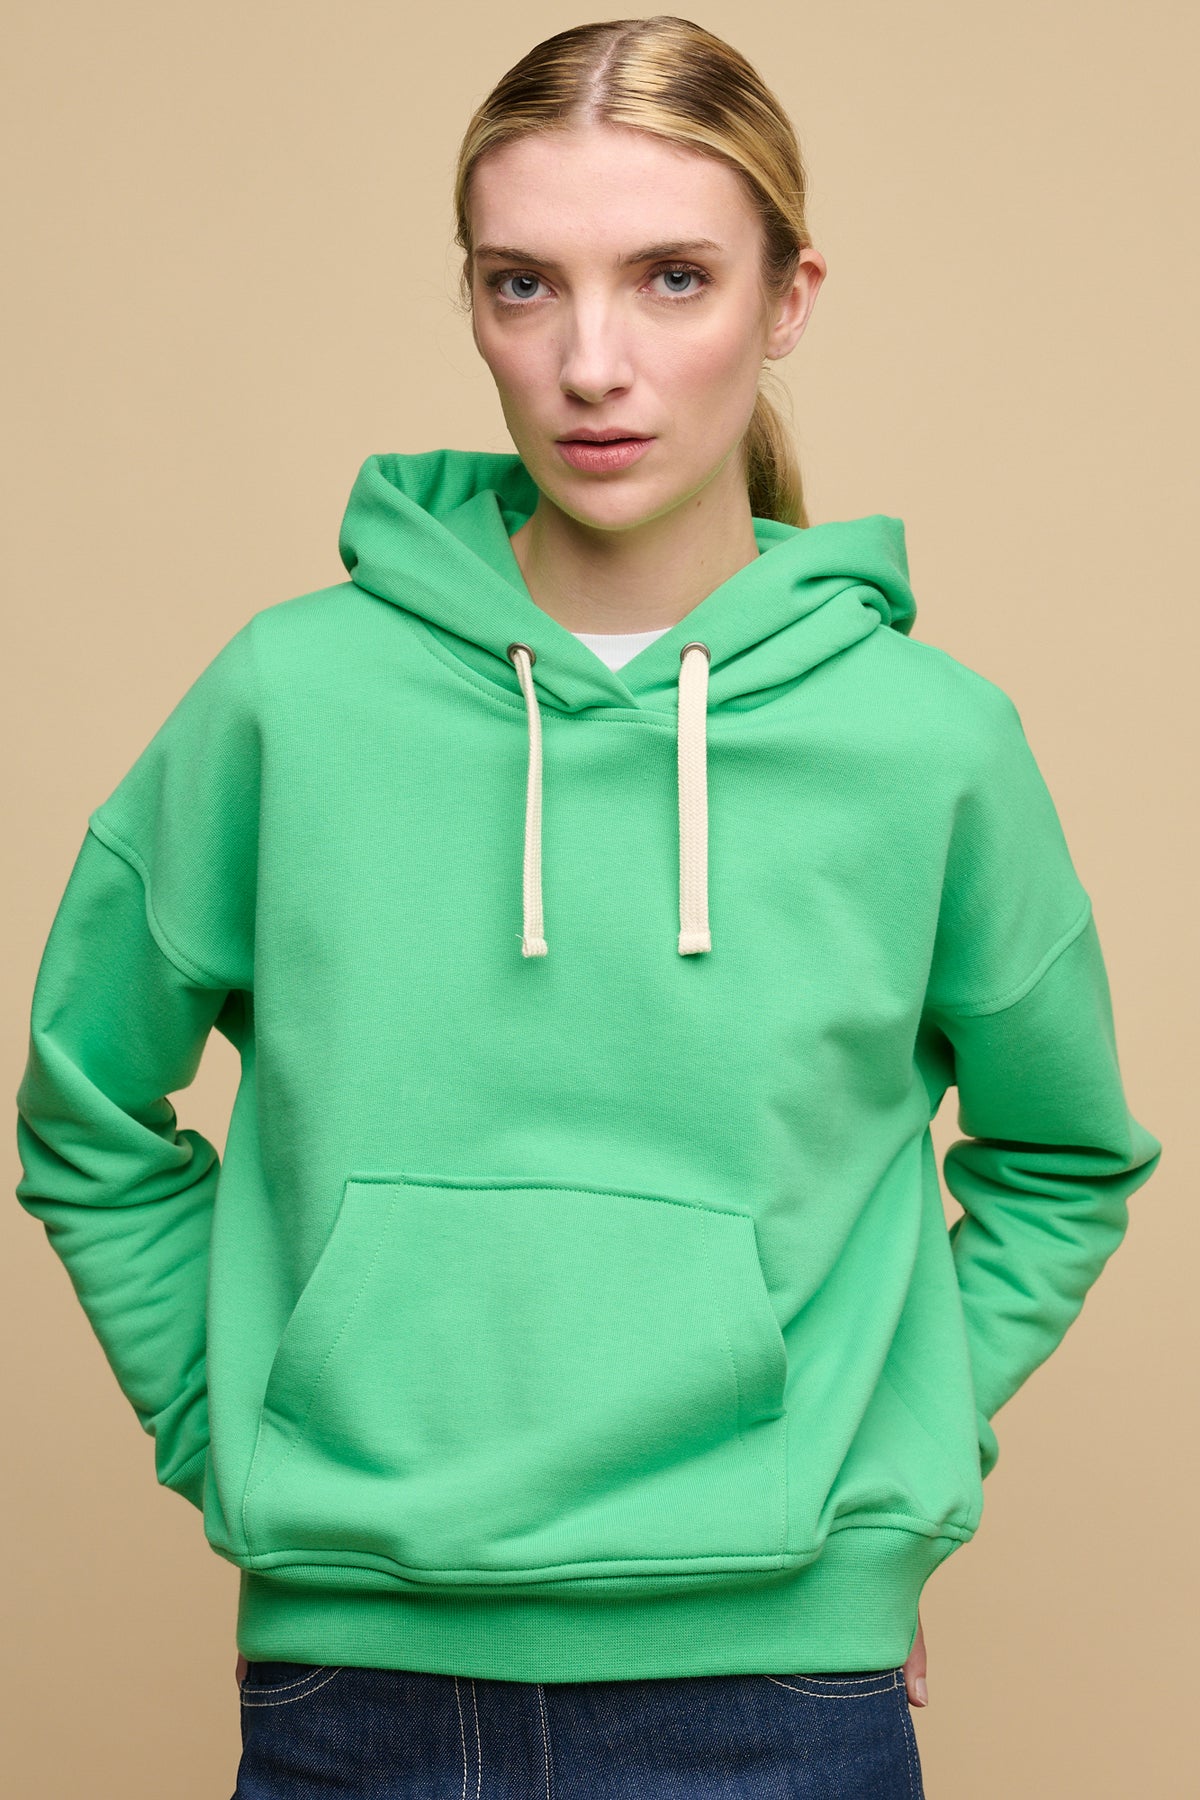 
            Thigh up image of female wearing hooded sweatshirt in apple green worn over white crew neck t shirt with blue jeans.